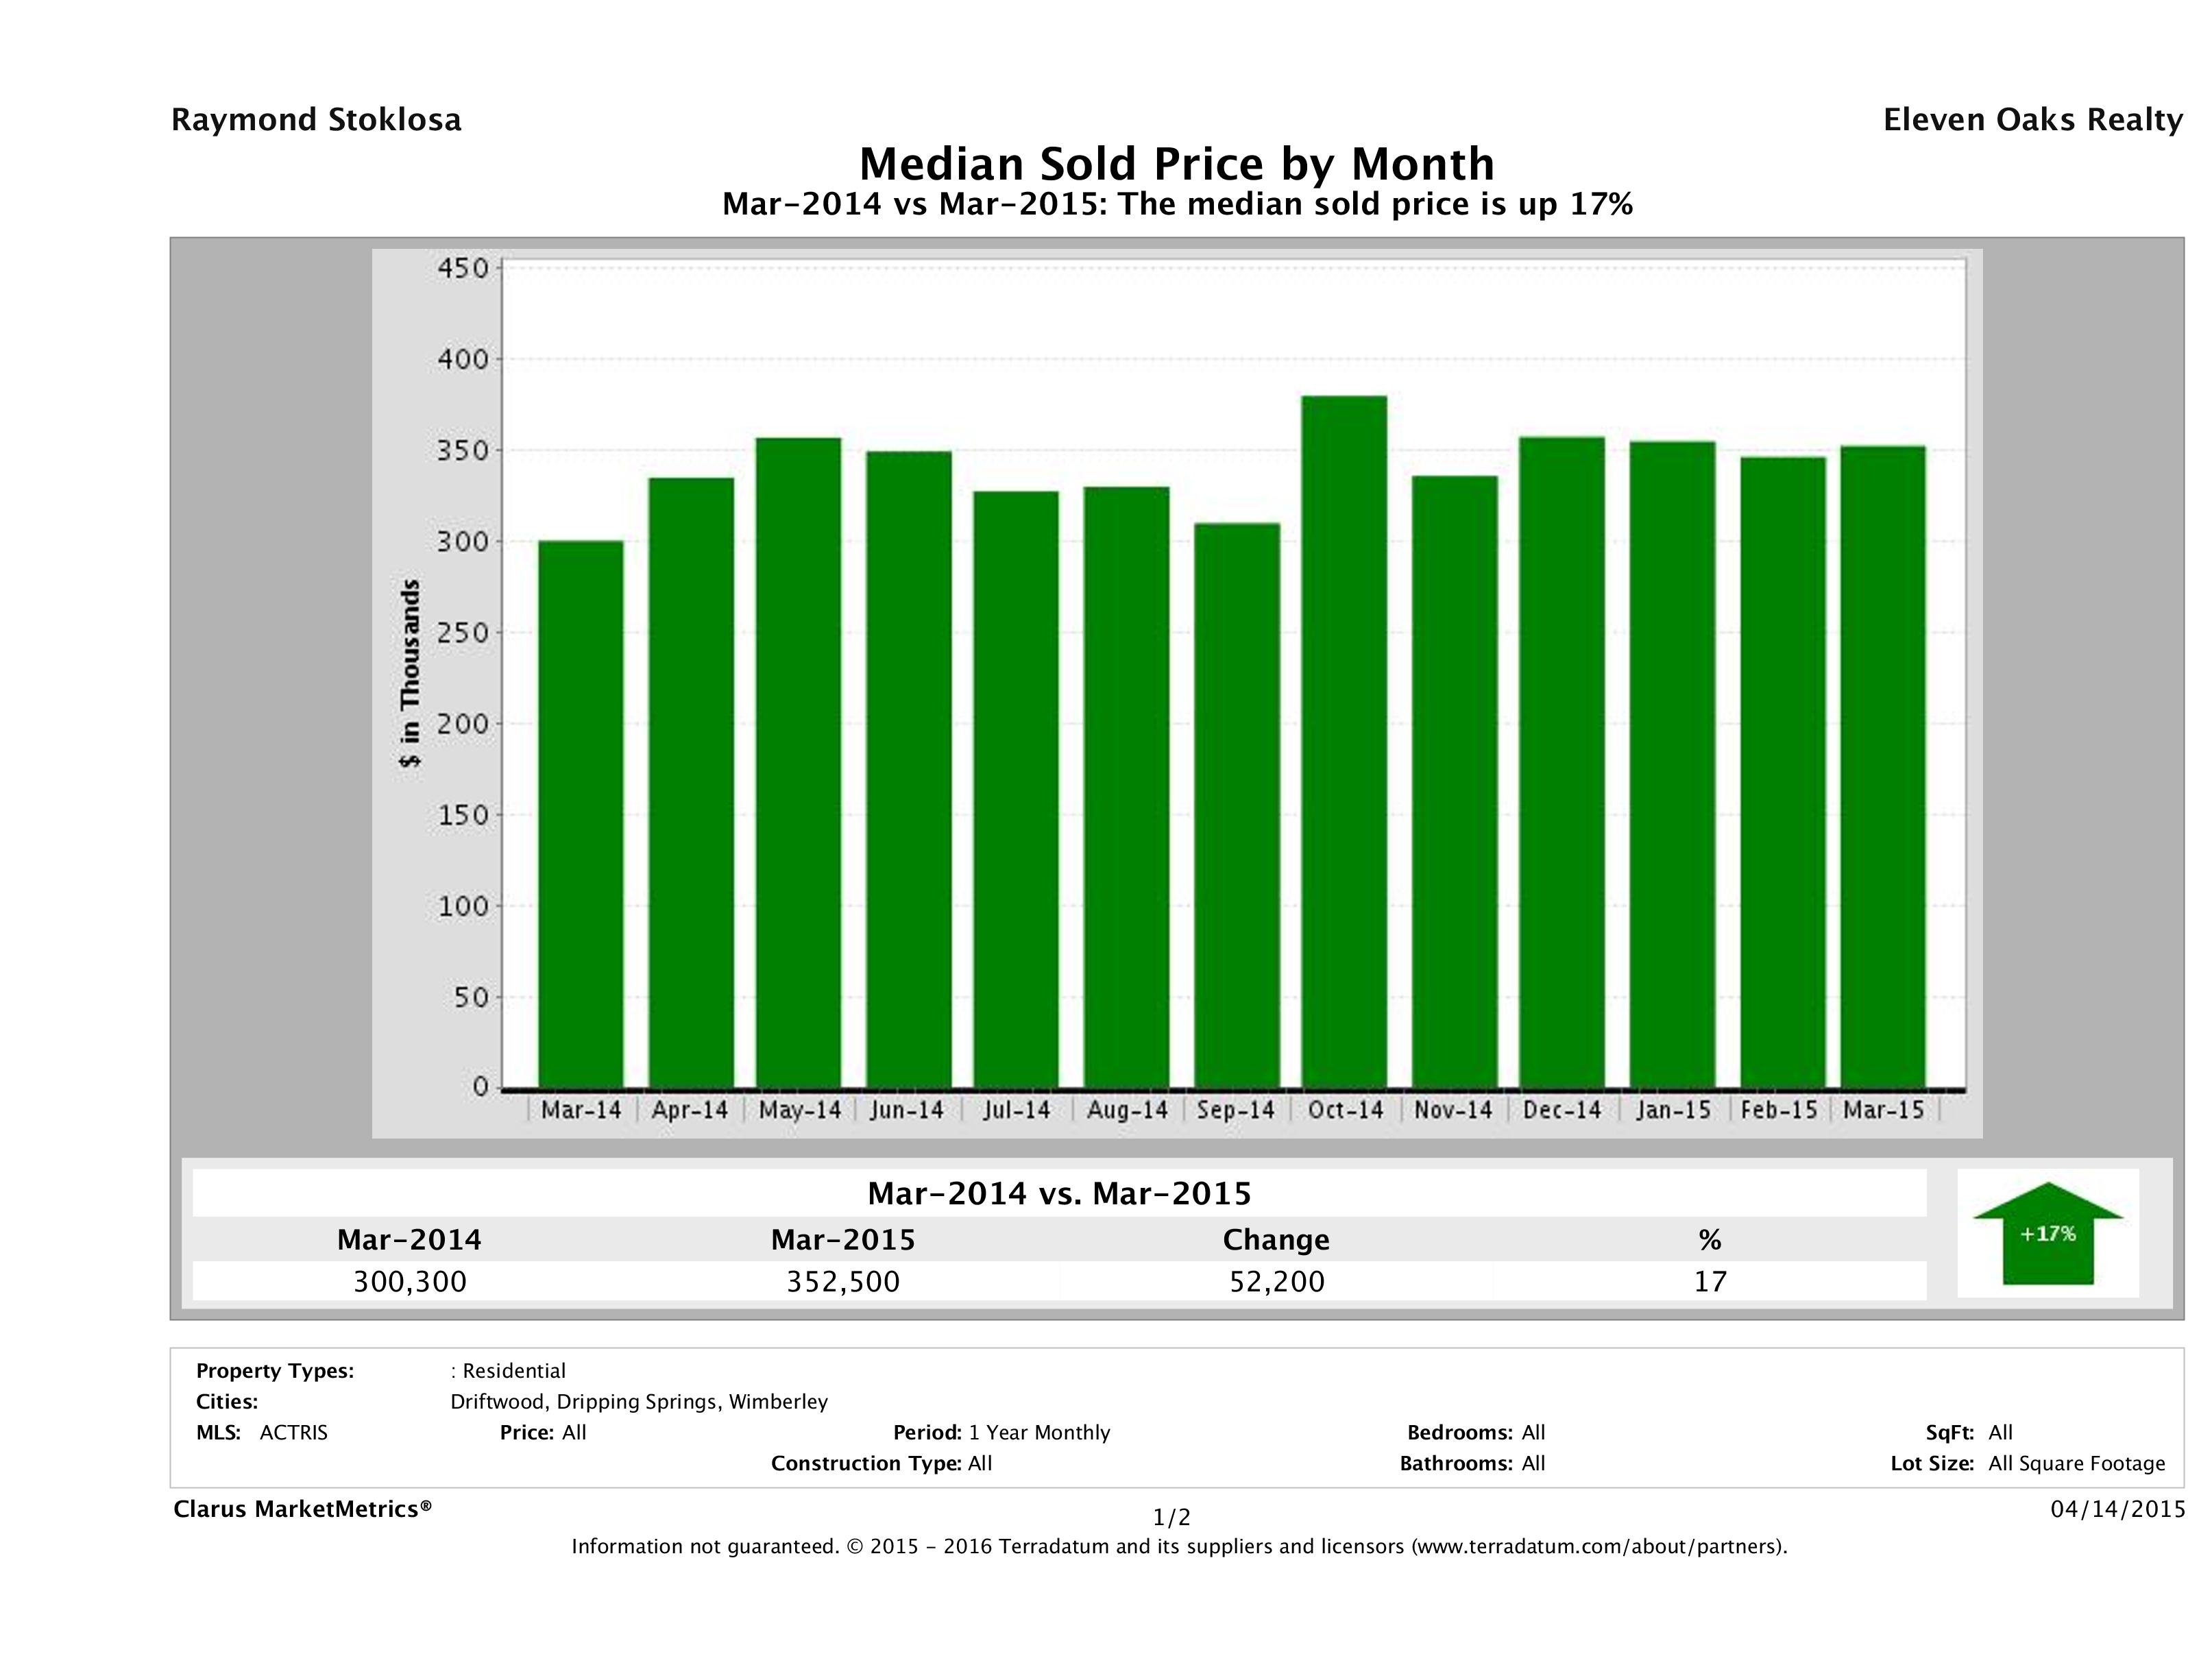 Hill Country median home price March 2015